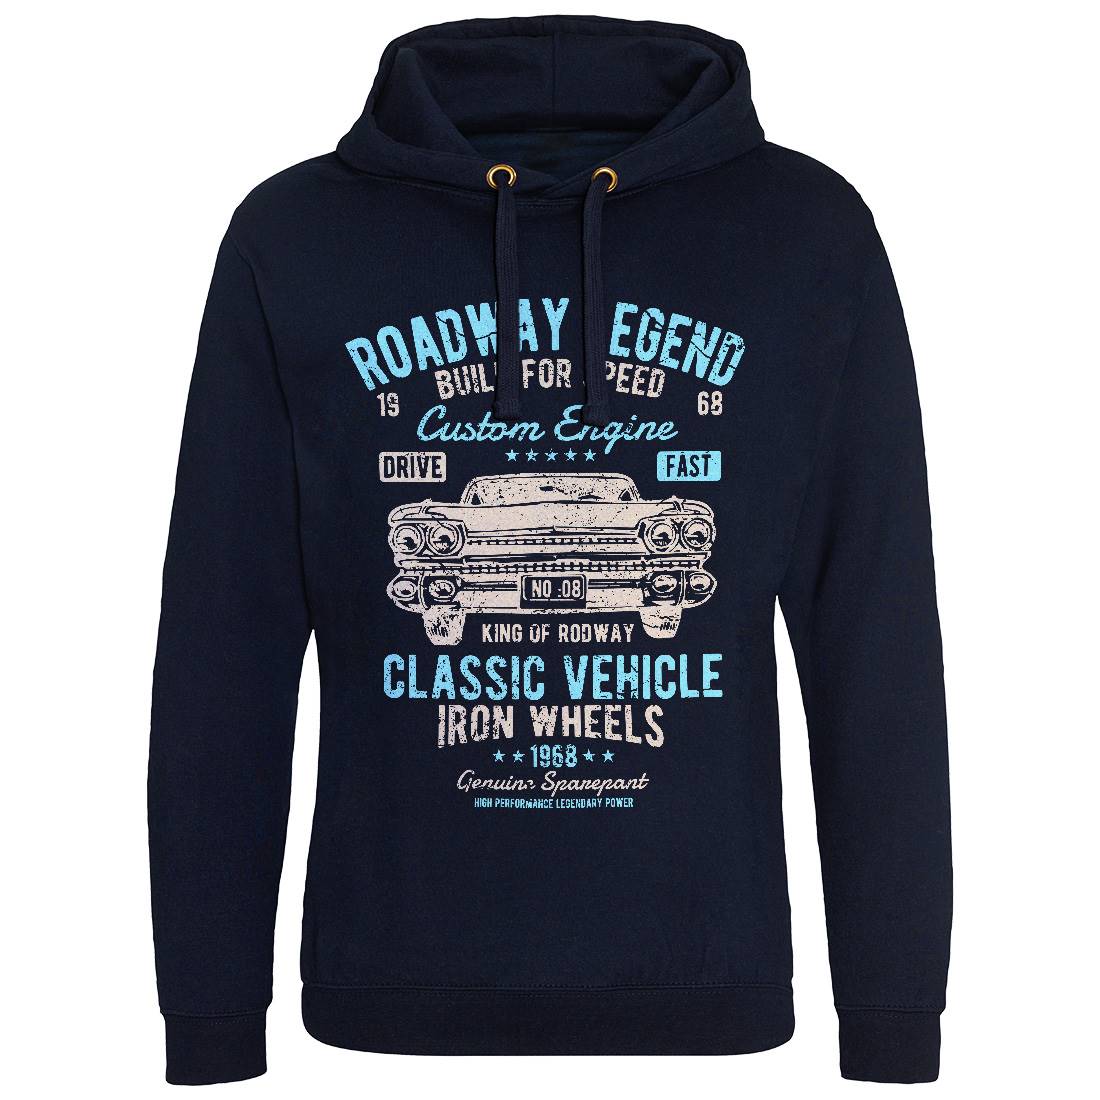 Roadway Legend Mens Hoodie Without Pocket Cars A125